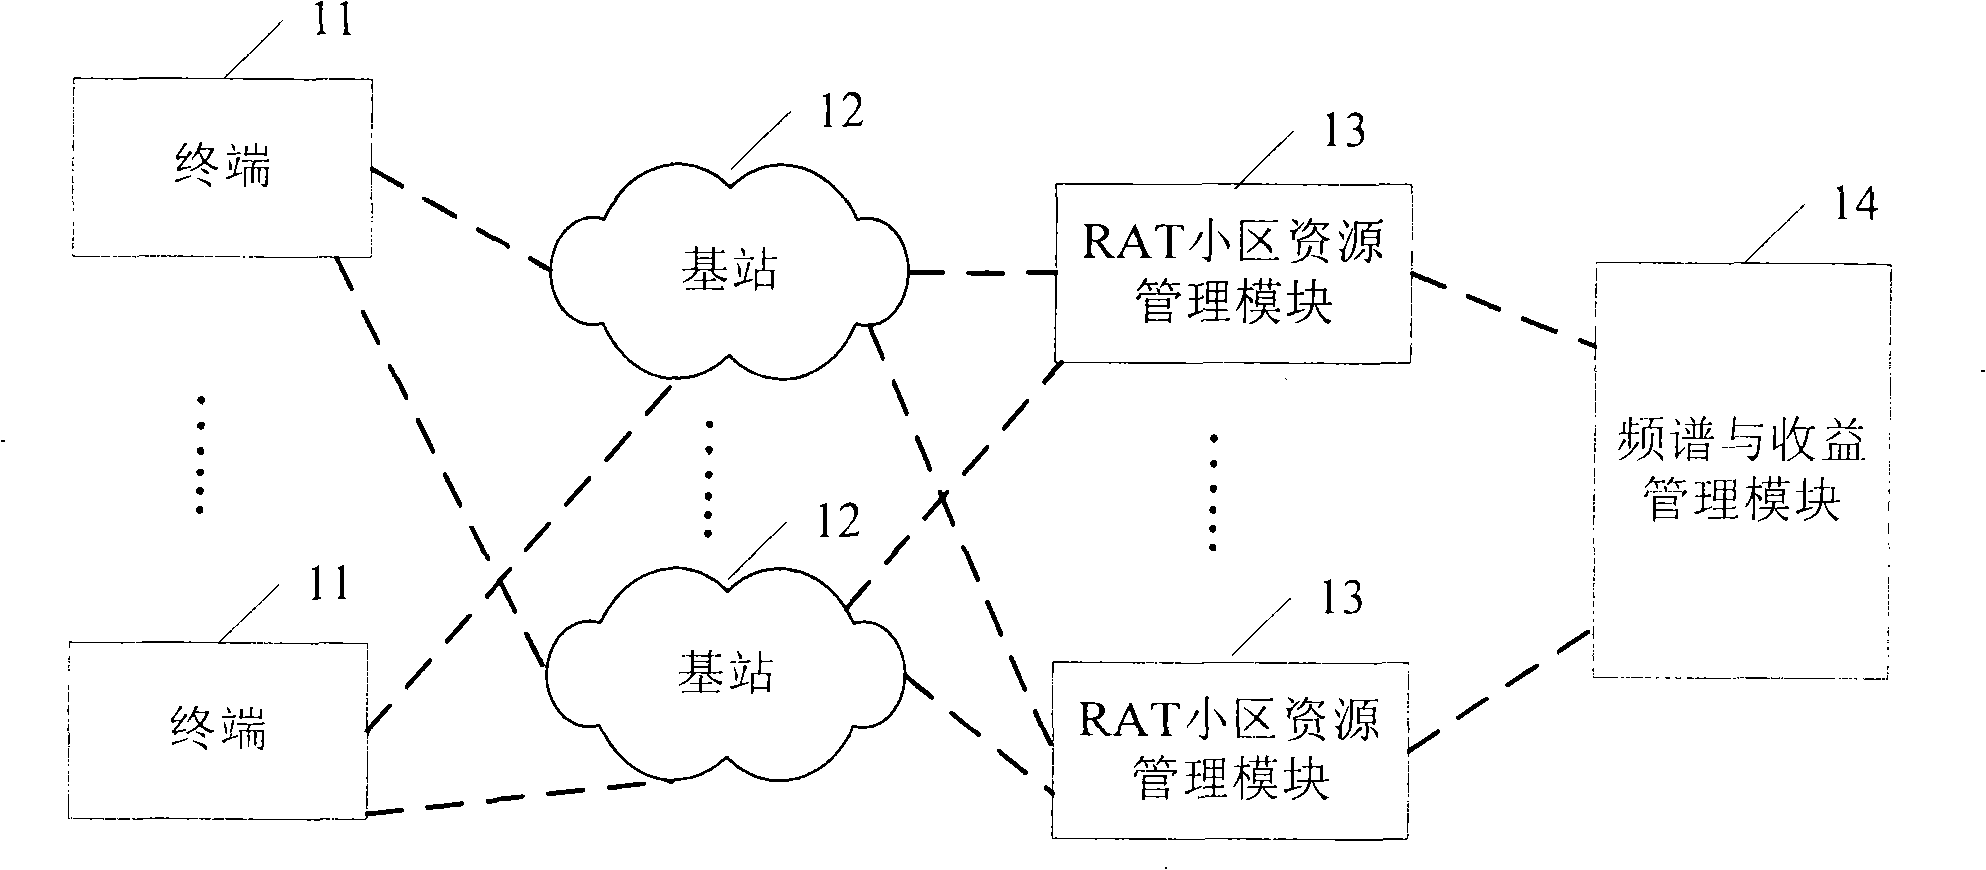 Method and system for managing centralized dynamic spectrum among wireless networks